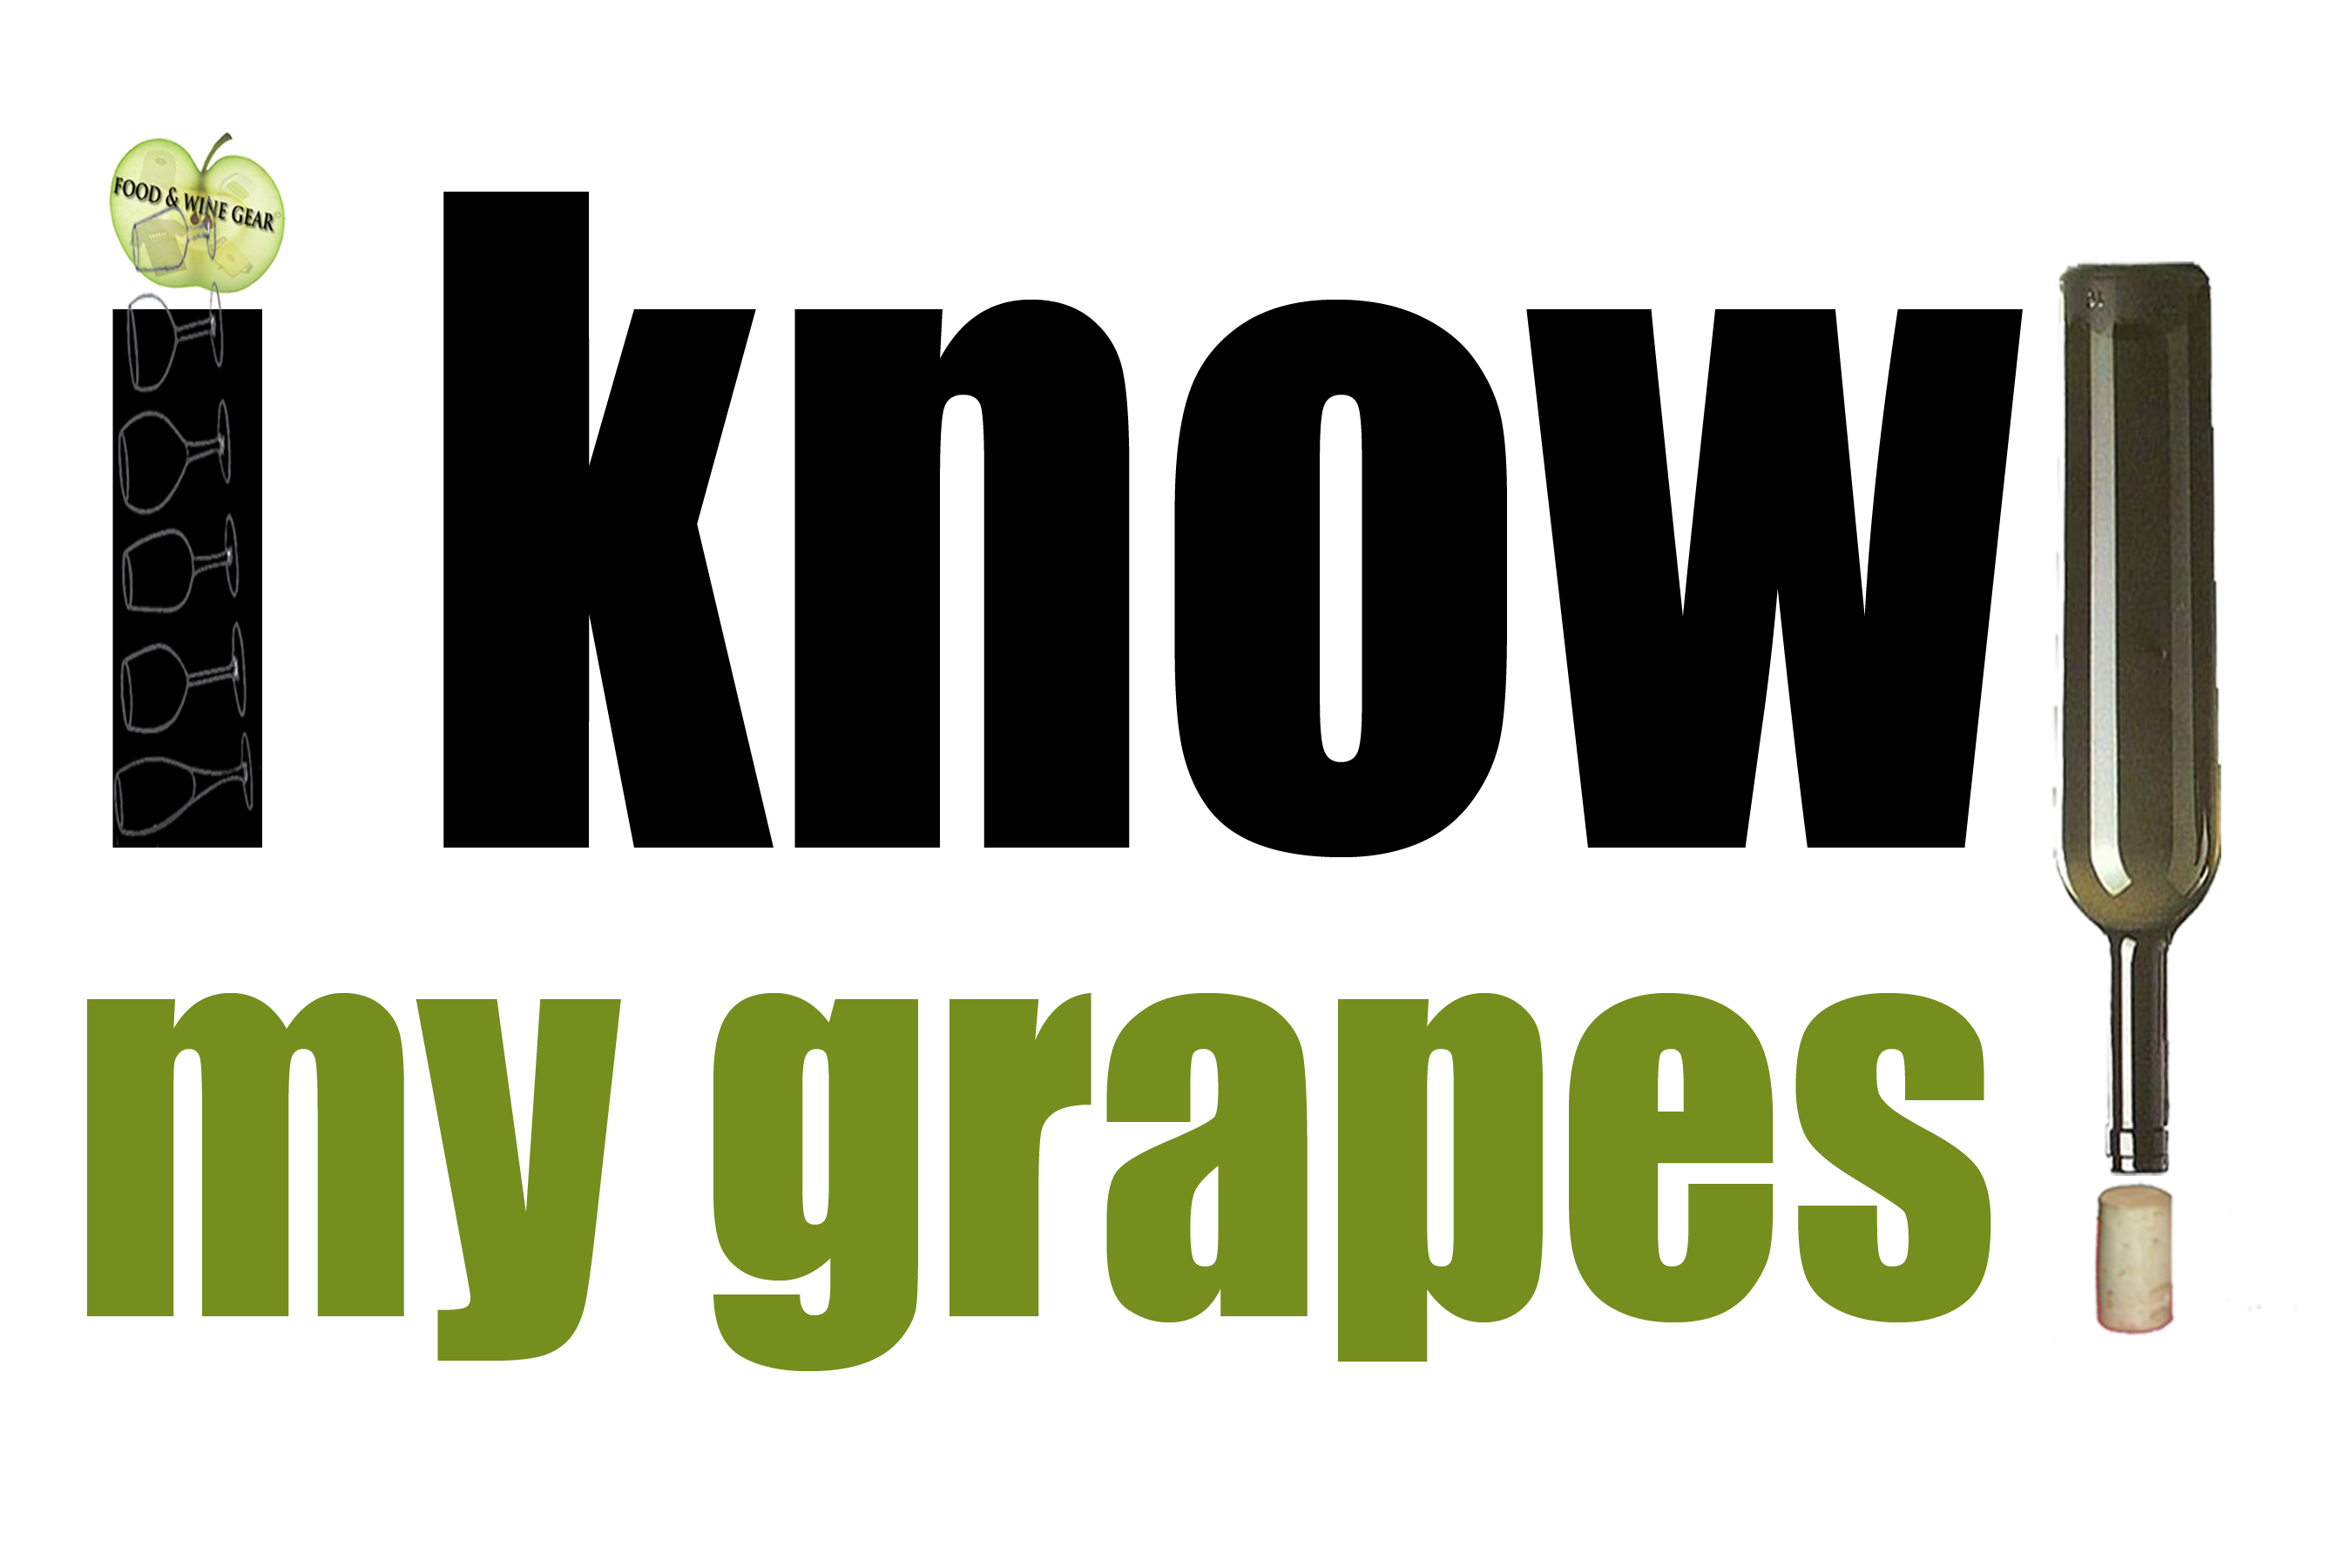 know my grapes